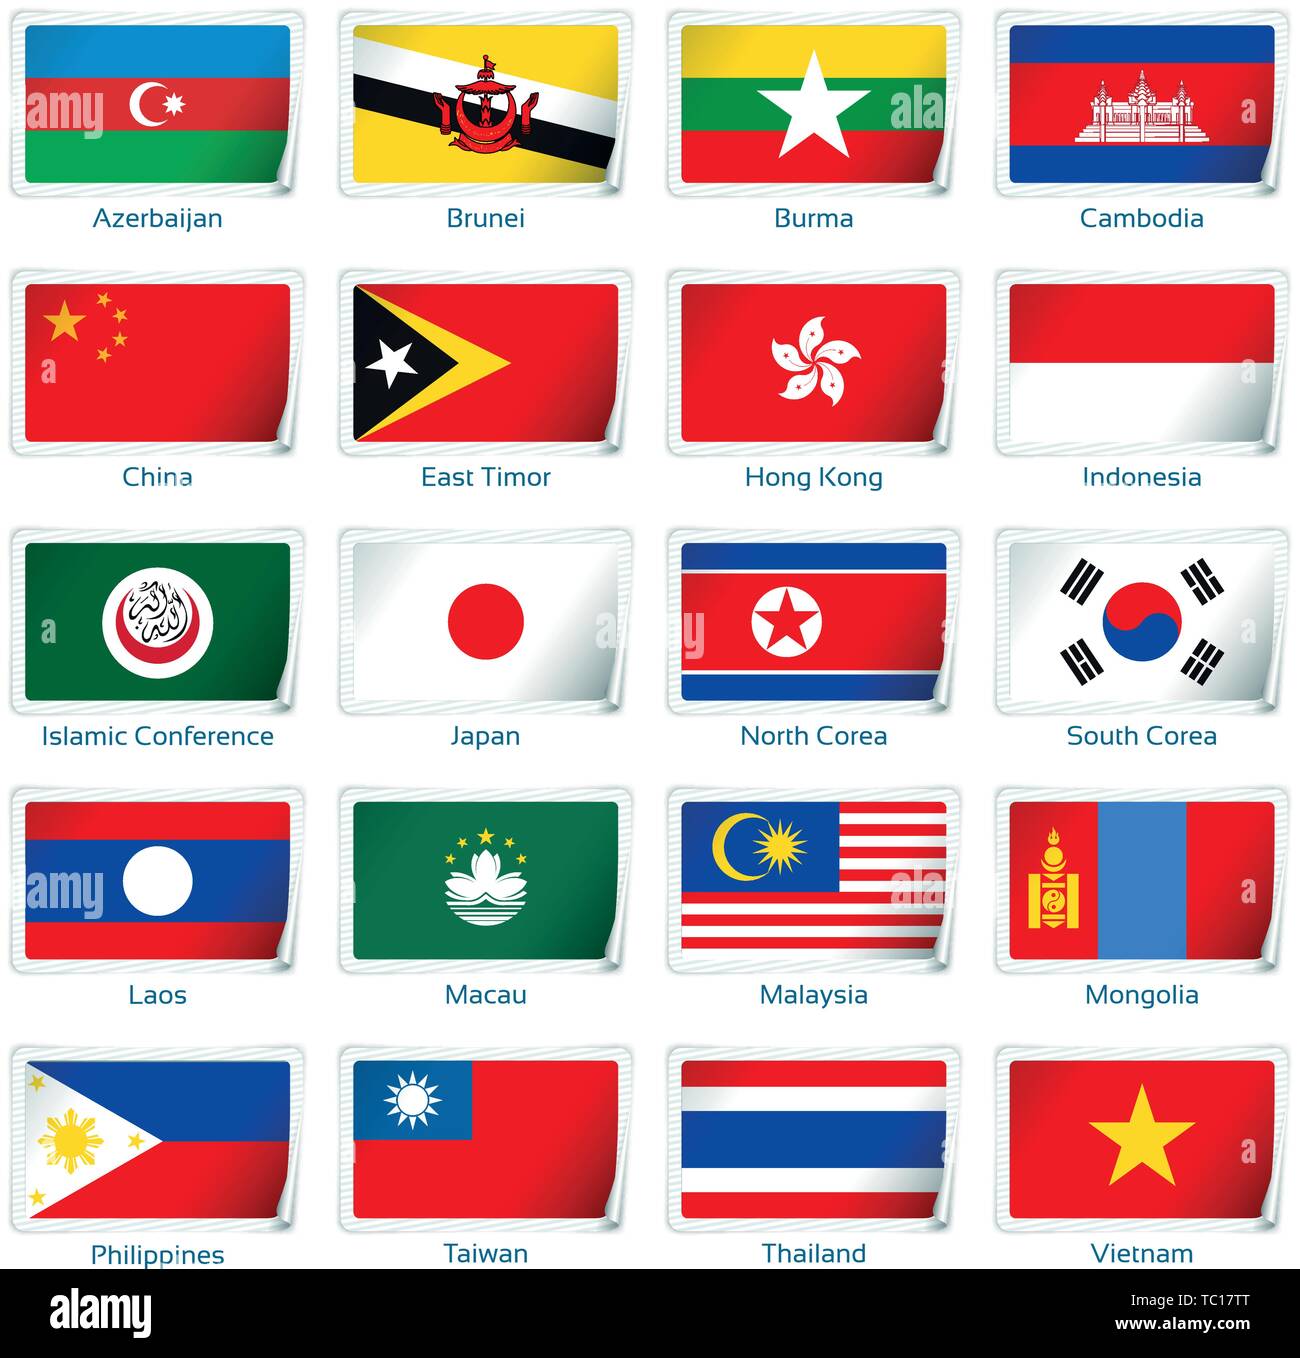 Sticker flags Eastern Asia. Vector illustration. 3 layers. Shadows, flat flag you can use it separately, sticker. Collection of 220 world flags. Accurate colors. Easy changes. Stock Vector